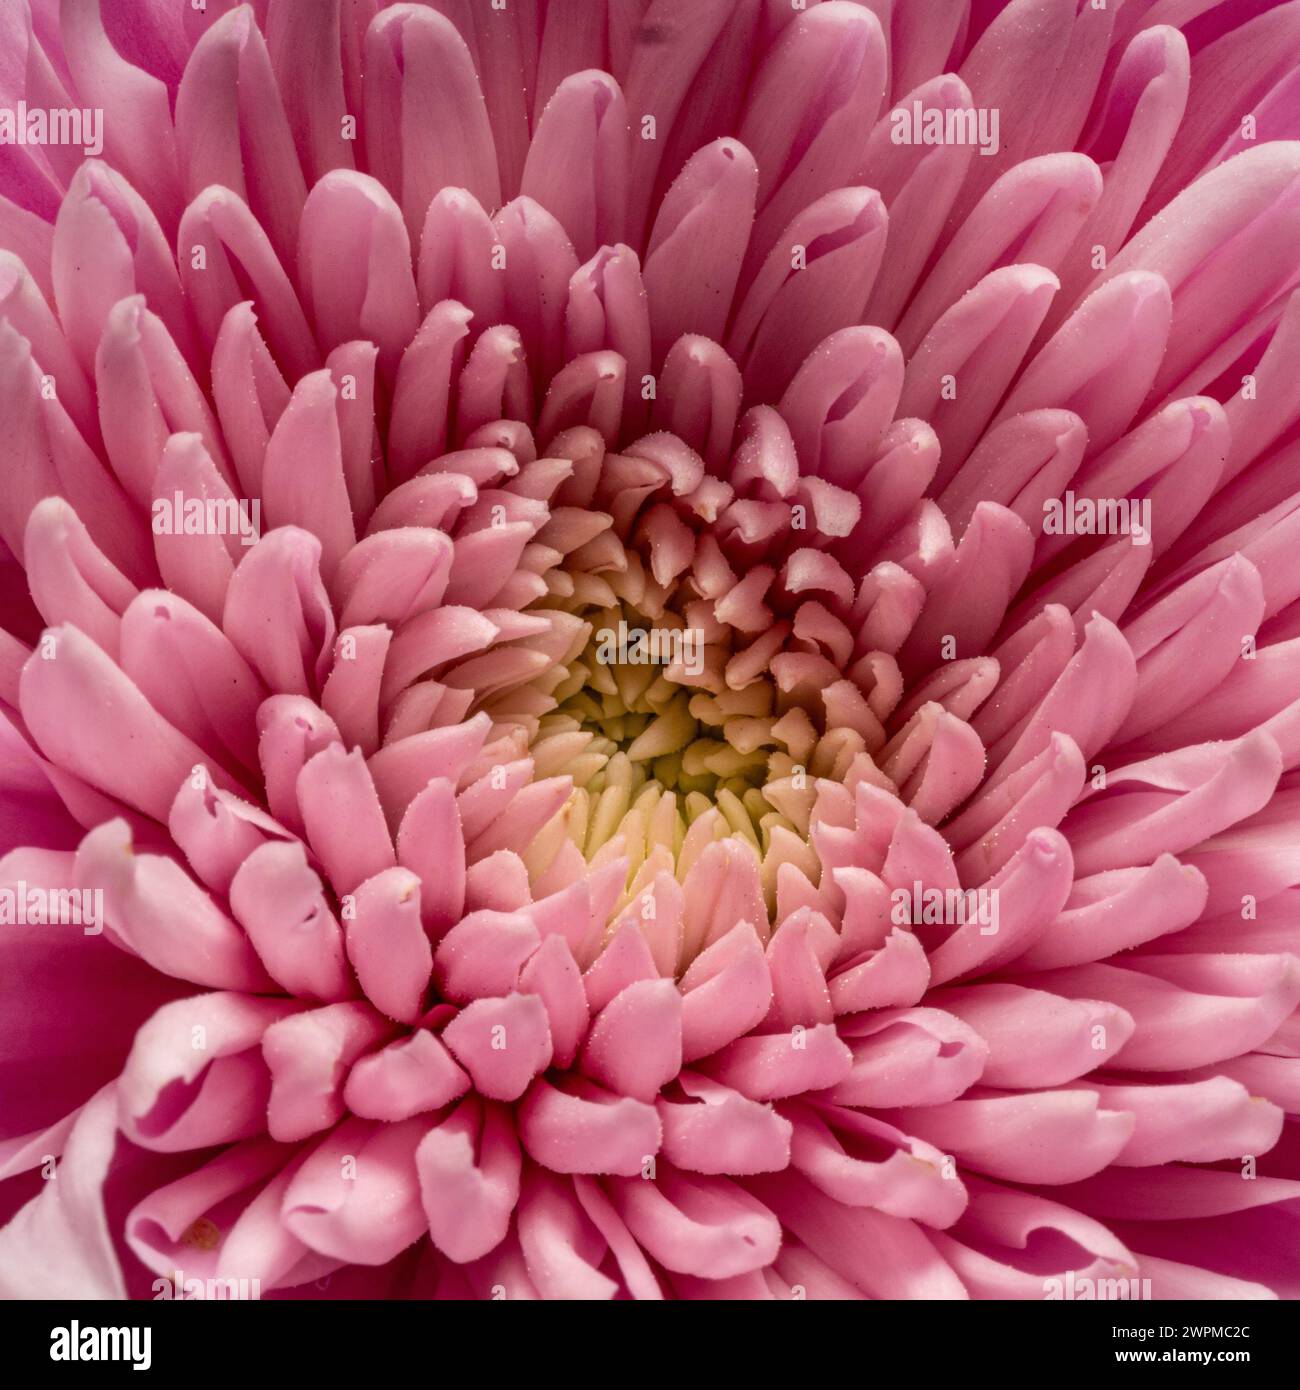 Close-up of the centre petals of a pink chrysanthemum flower Stock Photo